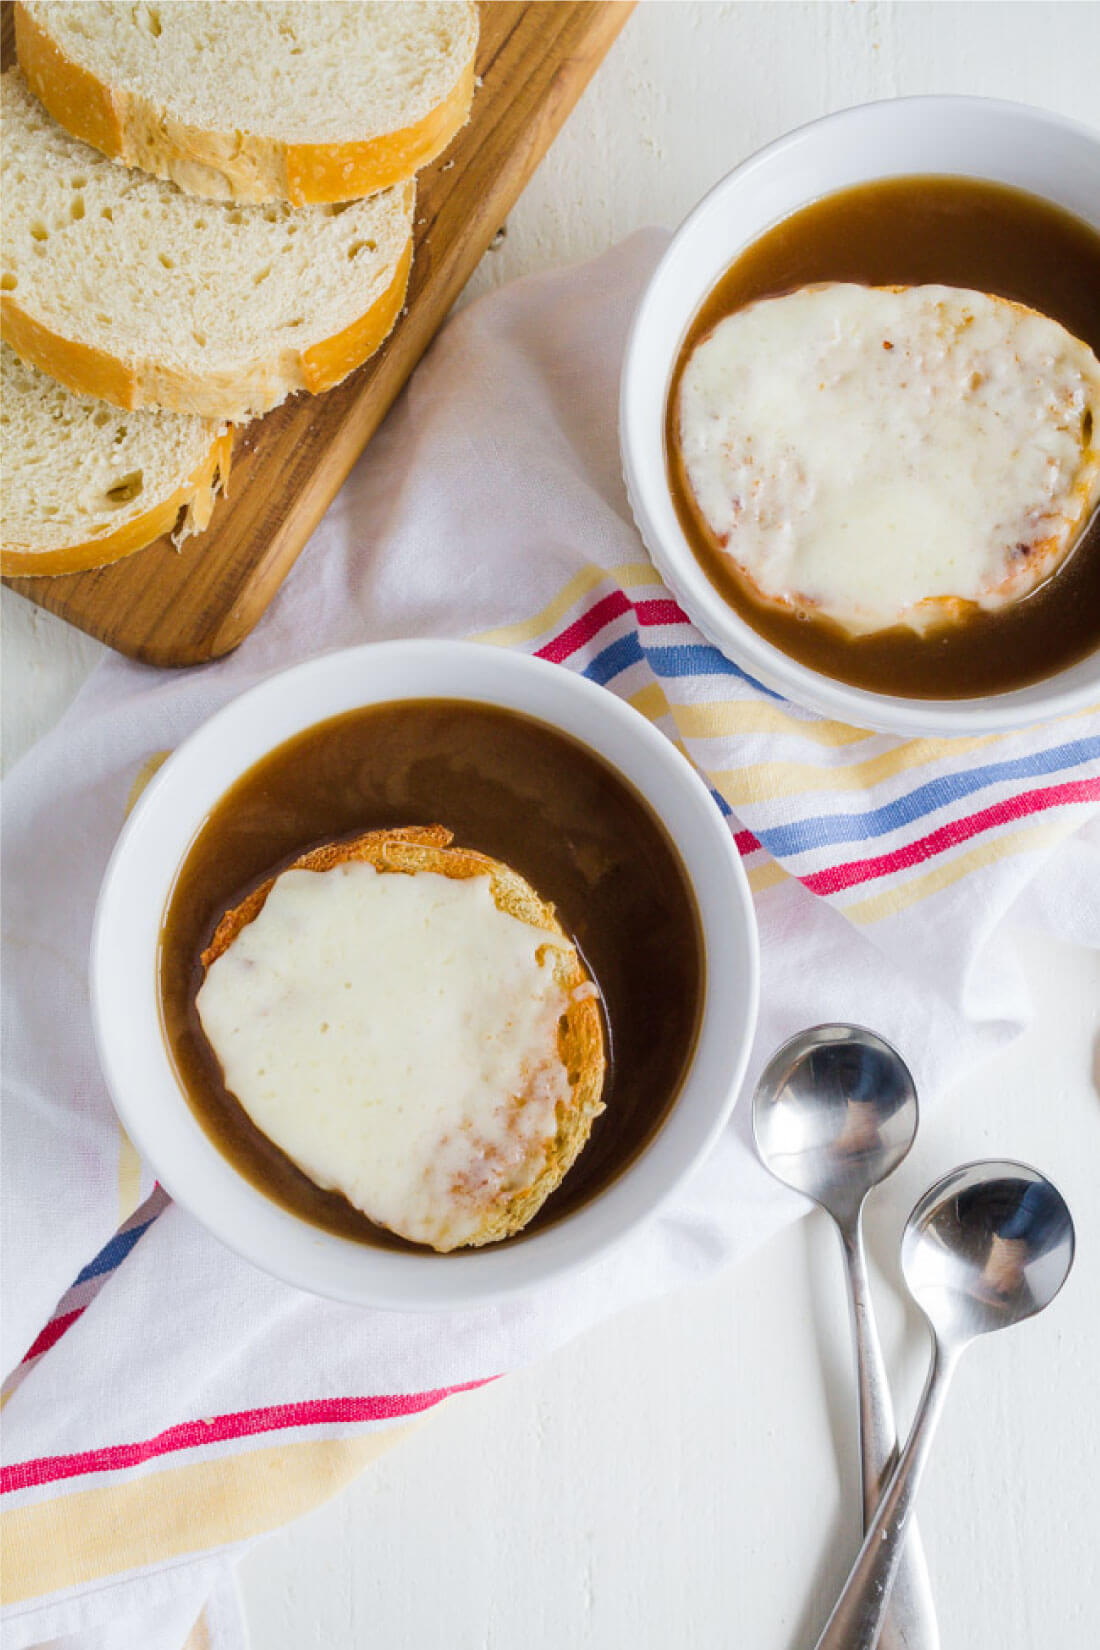 Slow Cooker French Onion Soup - it's time to whip out your crockpot and make one of your favorite soups! www.thirtyhandmadedays.com